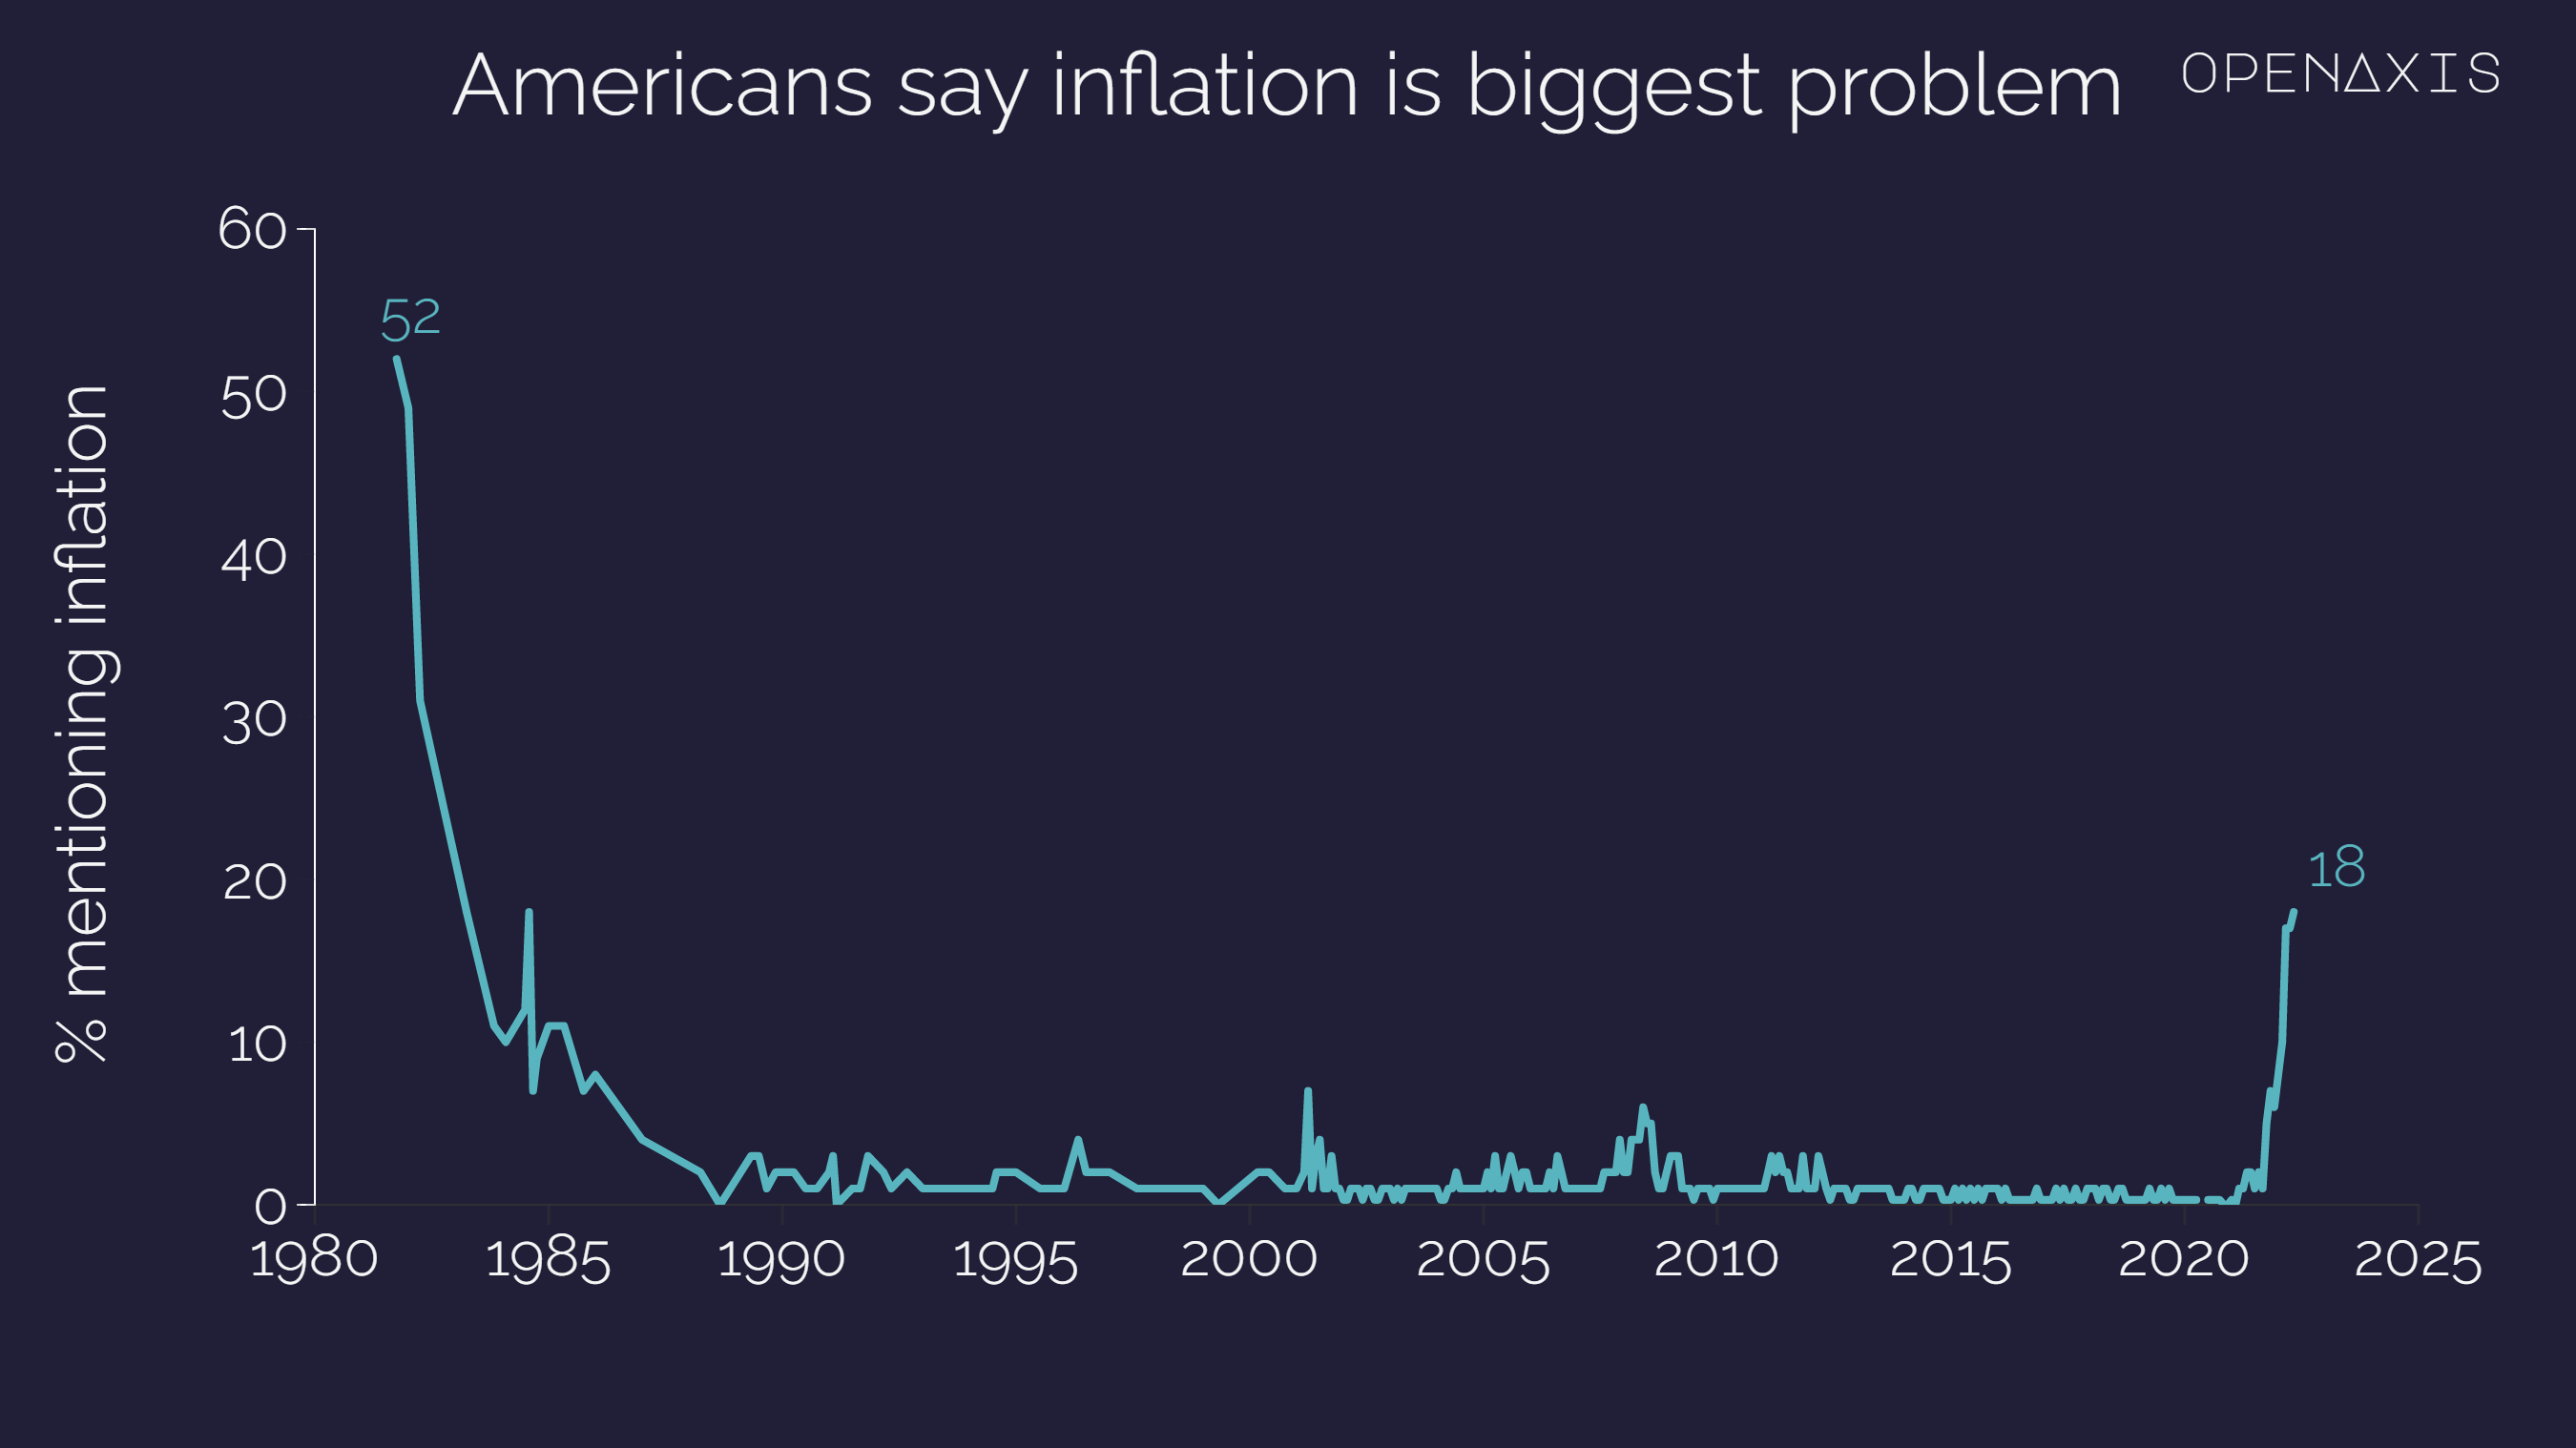 <p>Mentions of inflation have leveled off since March 2022, with readings of 17% or 18%, after increasing throughout the fall and winter months.</p><p><br /></p><p>They remain relatively high compared with recent history but have been higher in the past, including 52% in October 1981, 49% in January 1982 and 31% in April 1982, around the time inflation was last at its current rate. Inflation had been named by an average of 1% of Americans between 1990 and 2021.</p><p><br /></p><p><span data-index="0" data-denotation-char data-id="0" data-value="&lt;a href=&quot;/search?q=%23inflation&quot; target=_self&gt;#inflation" data-link="/search?q=%23inflation">﻿<span contenteditable="false"><span></span><a href="/search?q=%23inflation" target="_self">#inflation</a></span>﻿</span> <span data-index="0" data-denotation-char data-id="0" data-value="&lt;a href=&quot;/search?q=%23economy&quot; target=_self&gt;#economy" data-link="/search?q=%23economy">﻿<span contenteditable="false"><span></span><a href="/search?q=%23economy" target="_self">#economy</a></span>﻿</span></p><p><br /></p><p>Source: <a href="/data/3873" target="_blank">Gallup</a></p><p><br /></p>